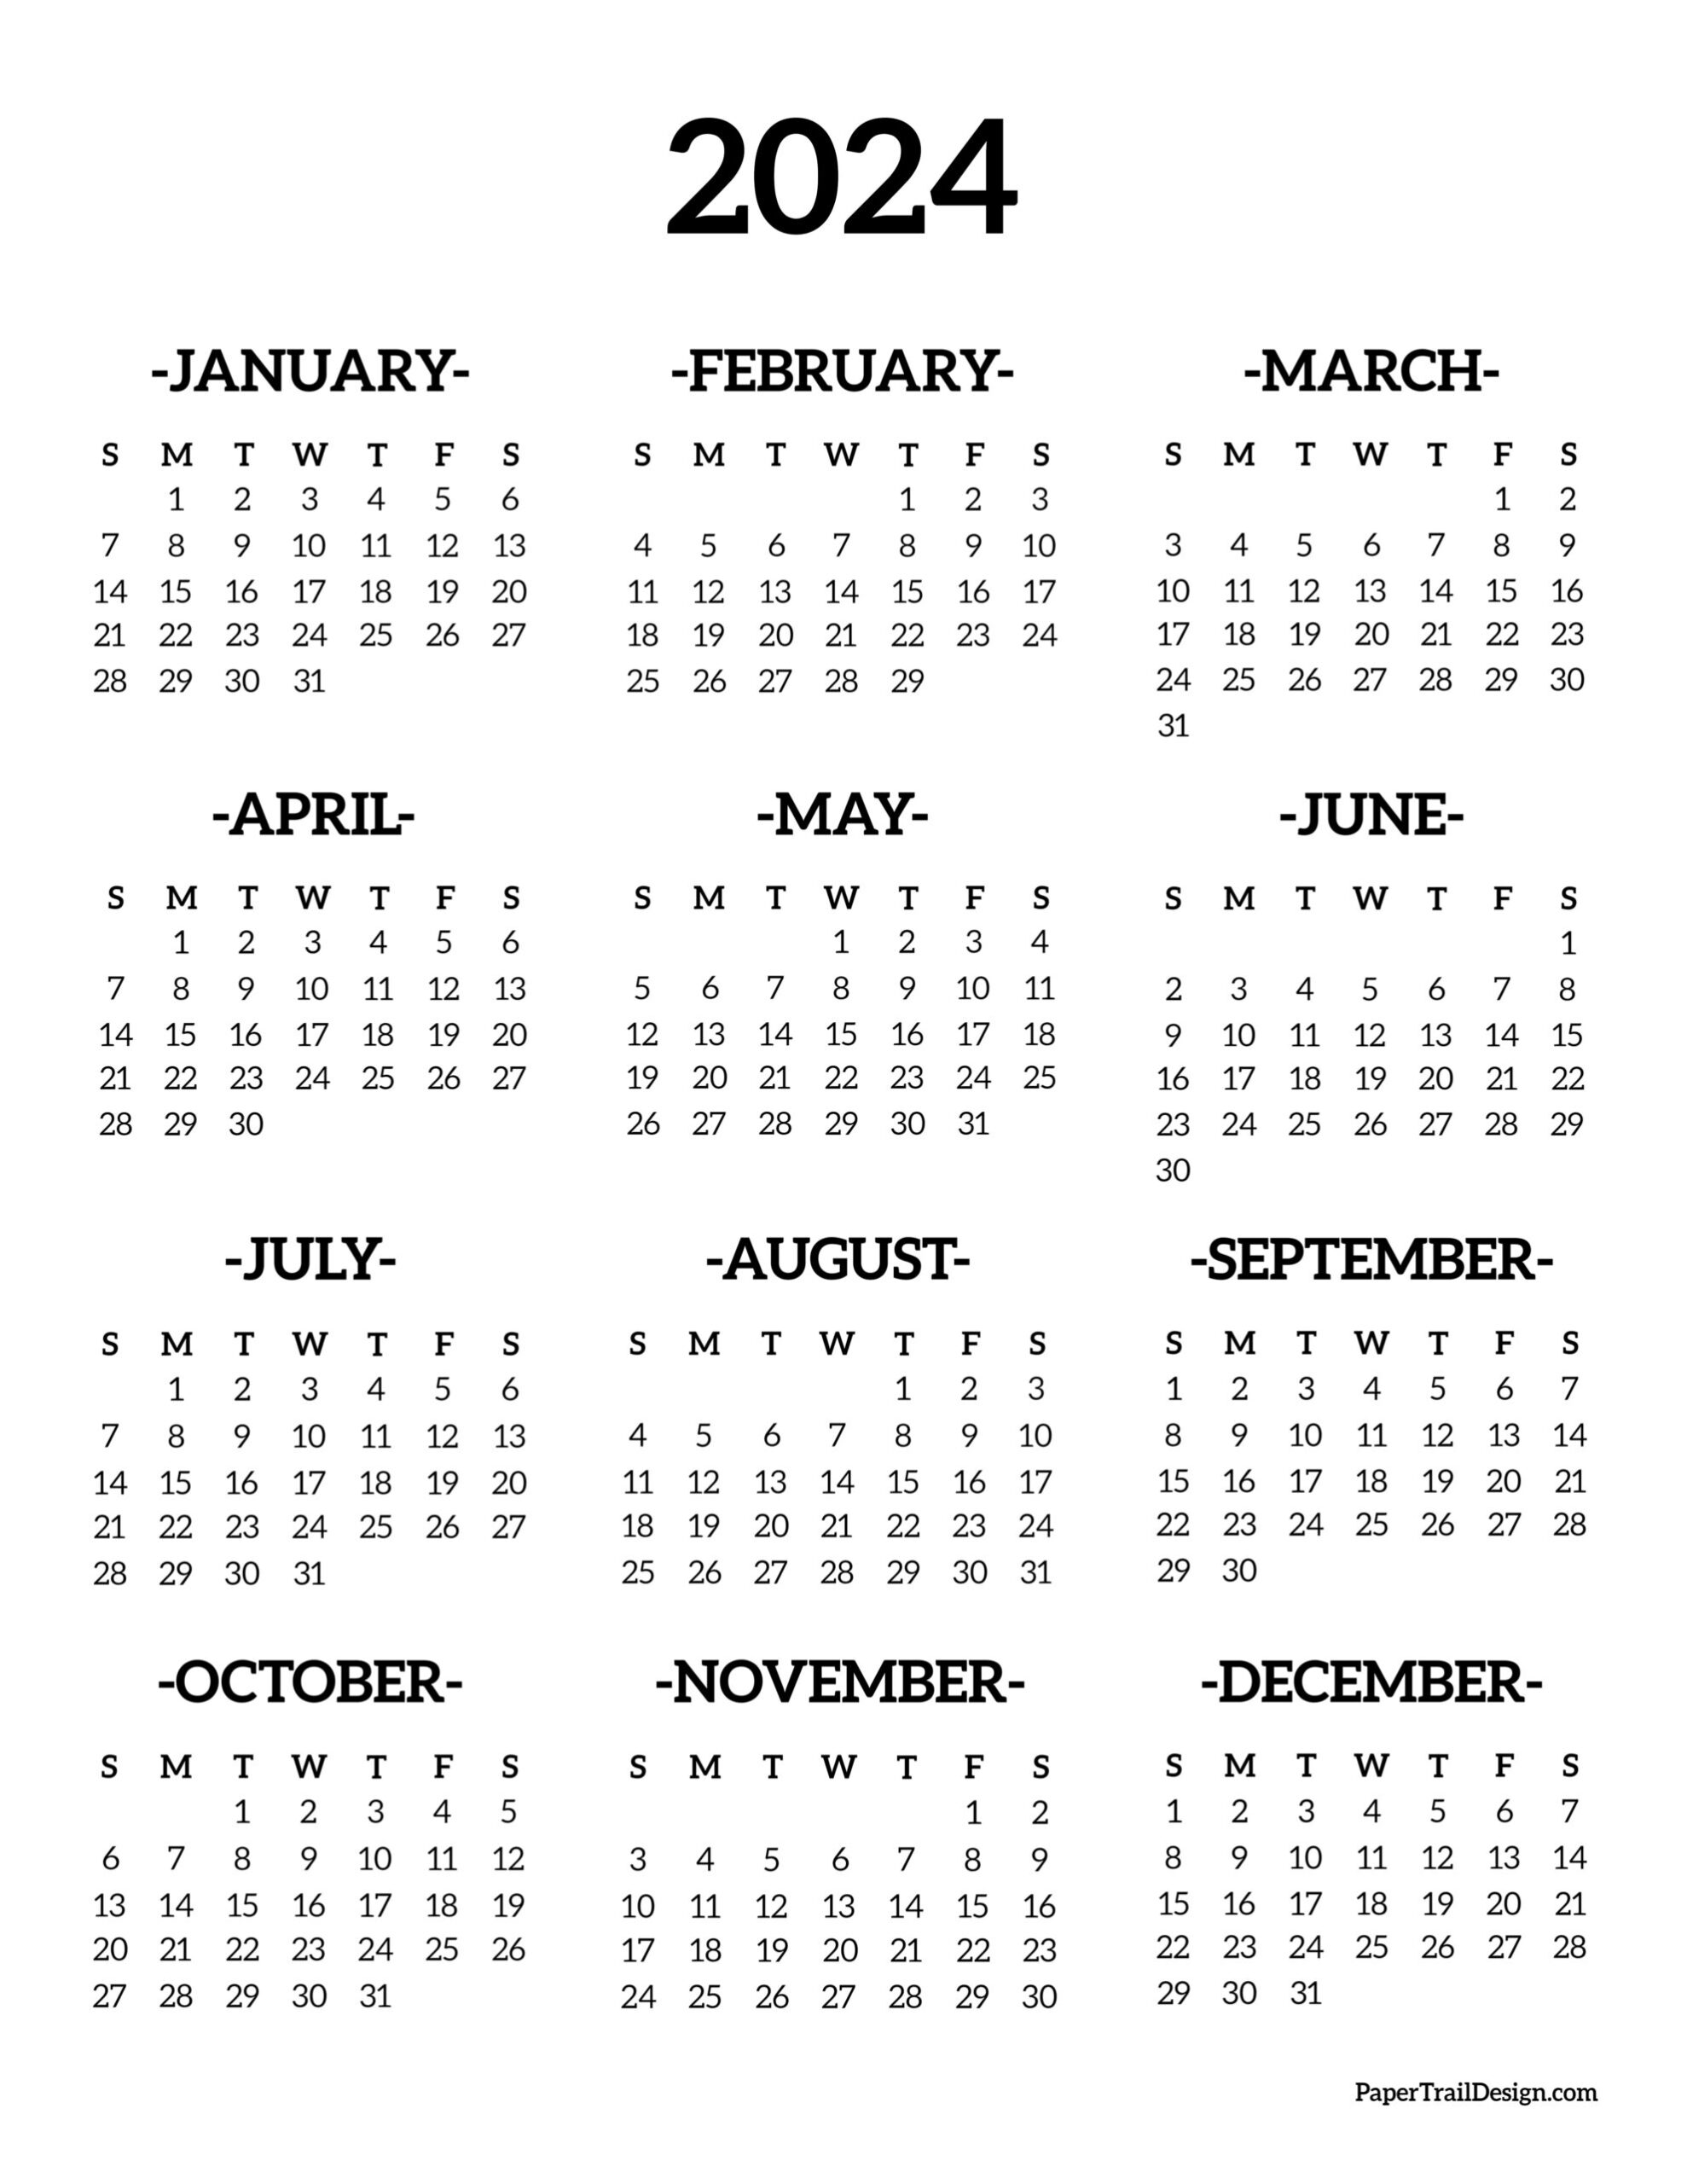 Calendar 2024 Printable One Page - Paper Trail Design for 2024 Yearly Calendar Printable One Page Free